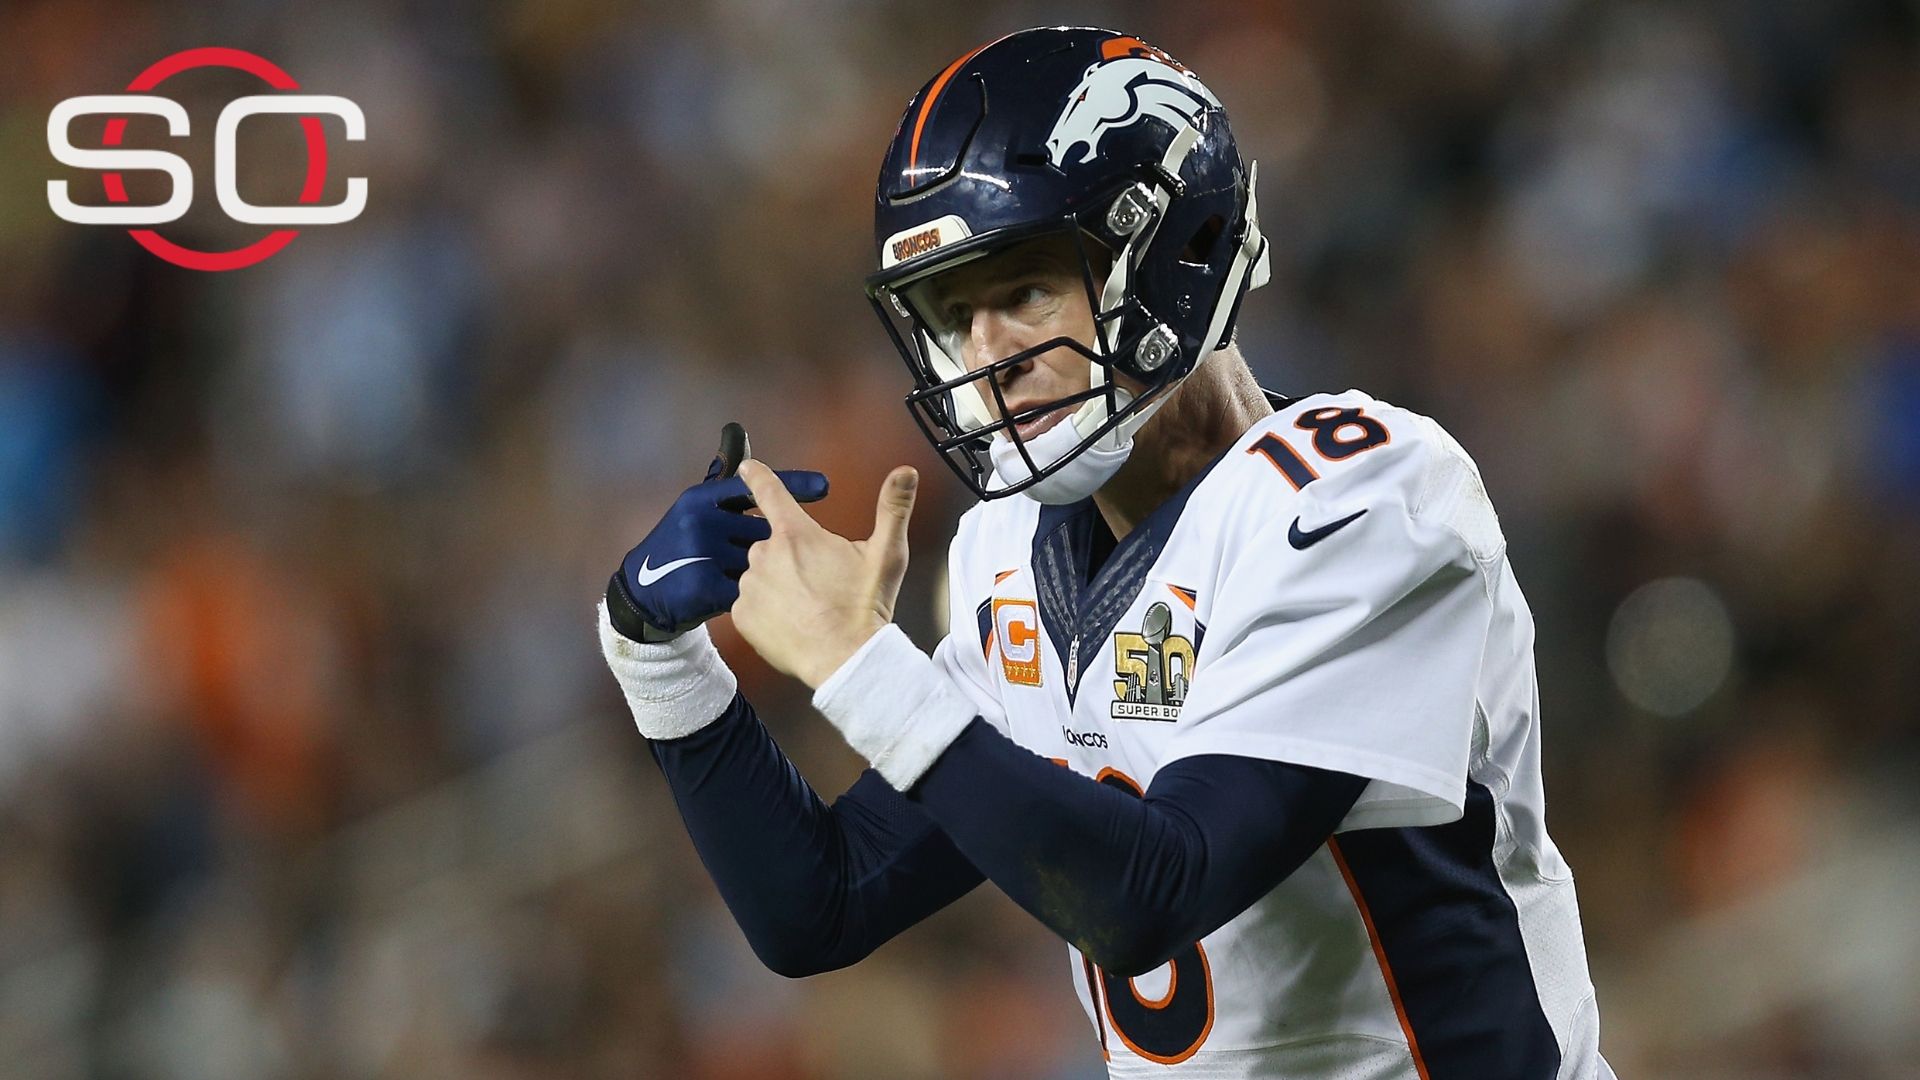 Peyton Manning will not sue Al Jazeera for linking him to HGH use